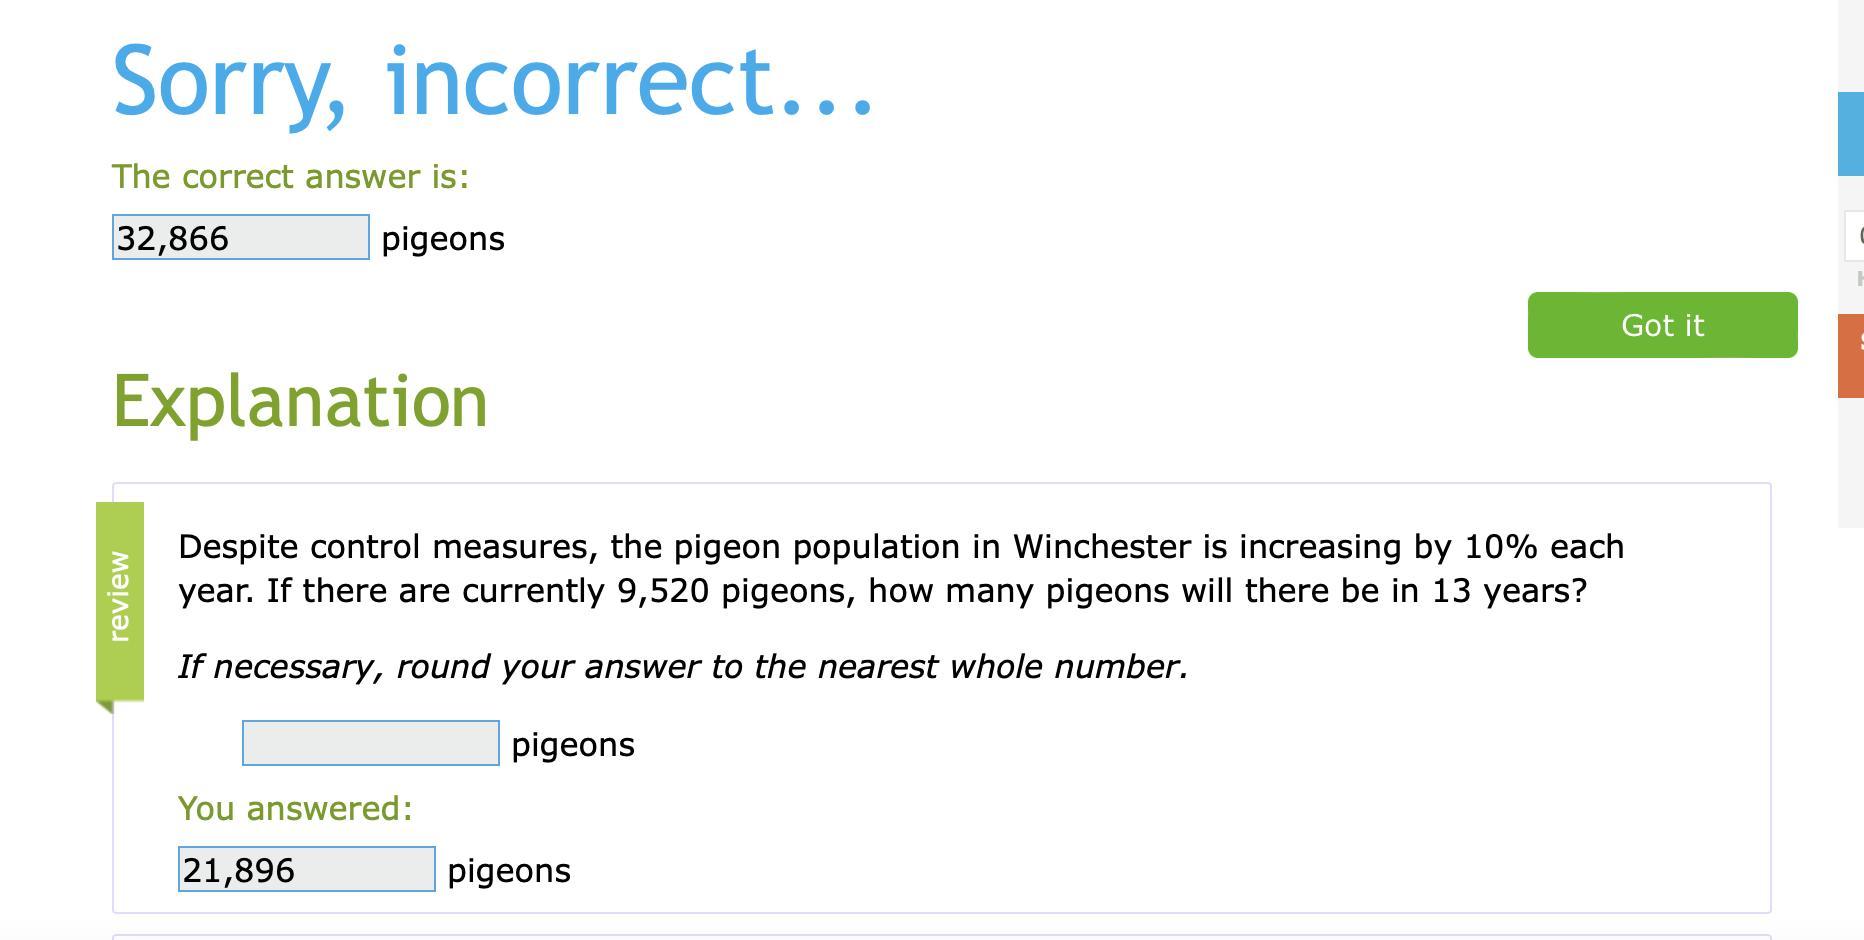 Despite Control Measures, The Pigeon Population In Winchester Is Increasing By 10% Each Year. If There